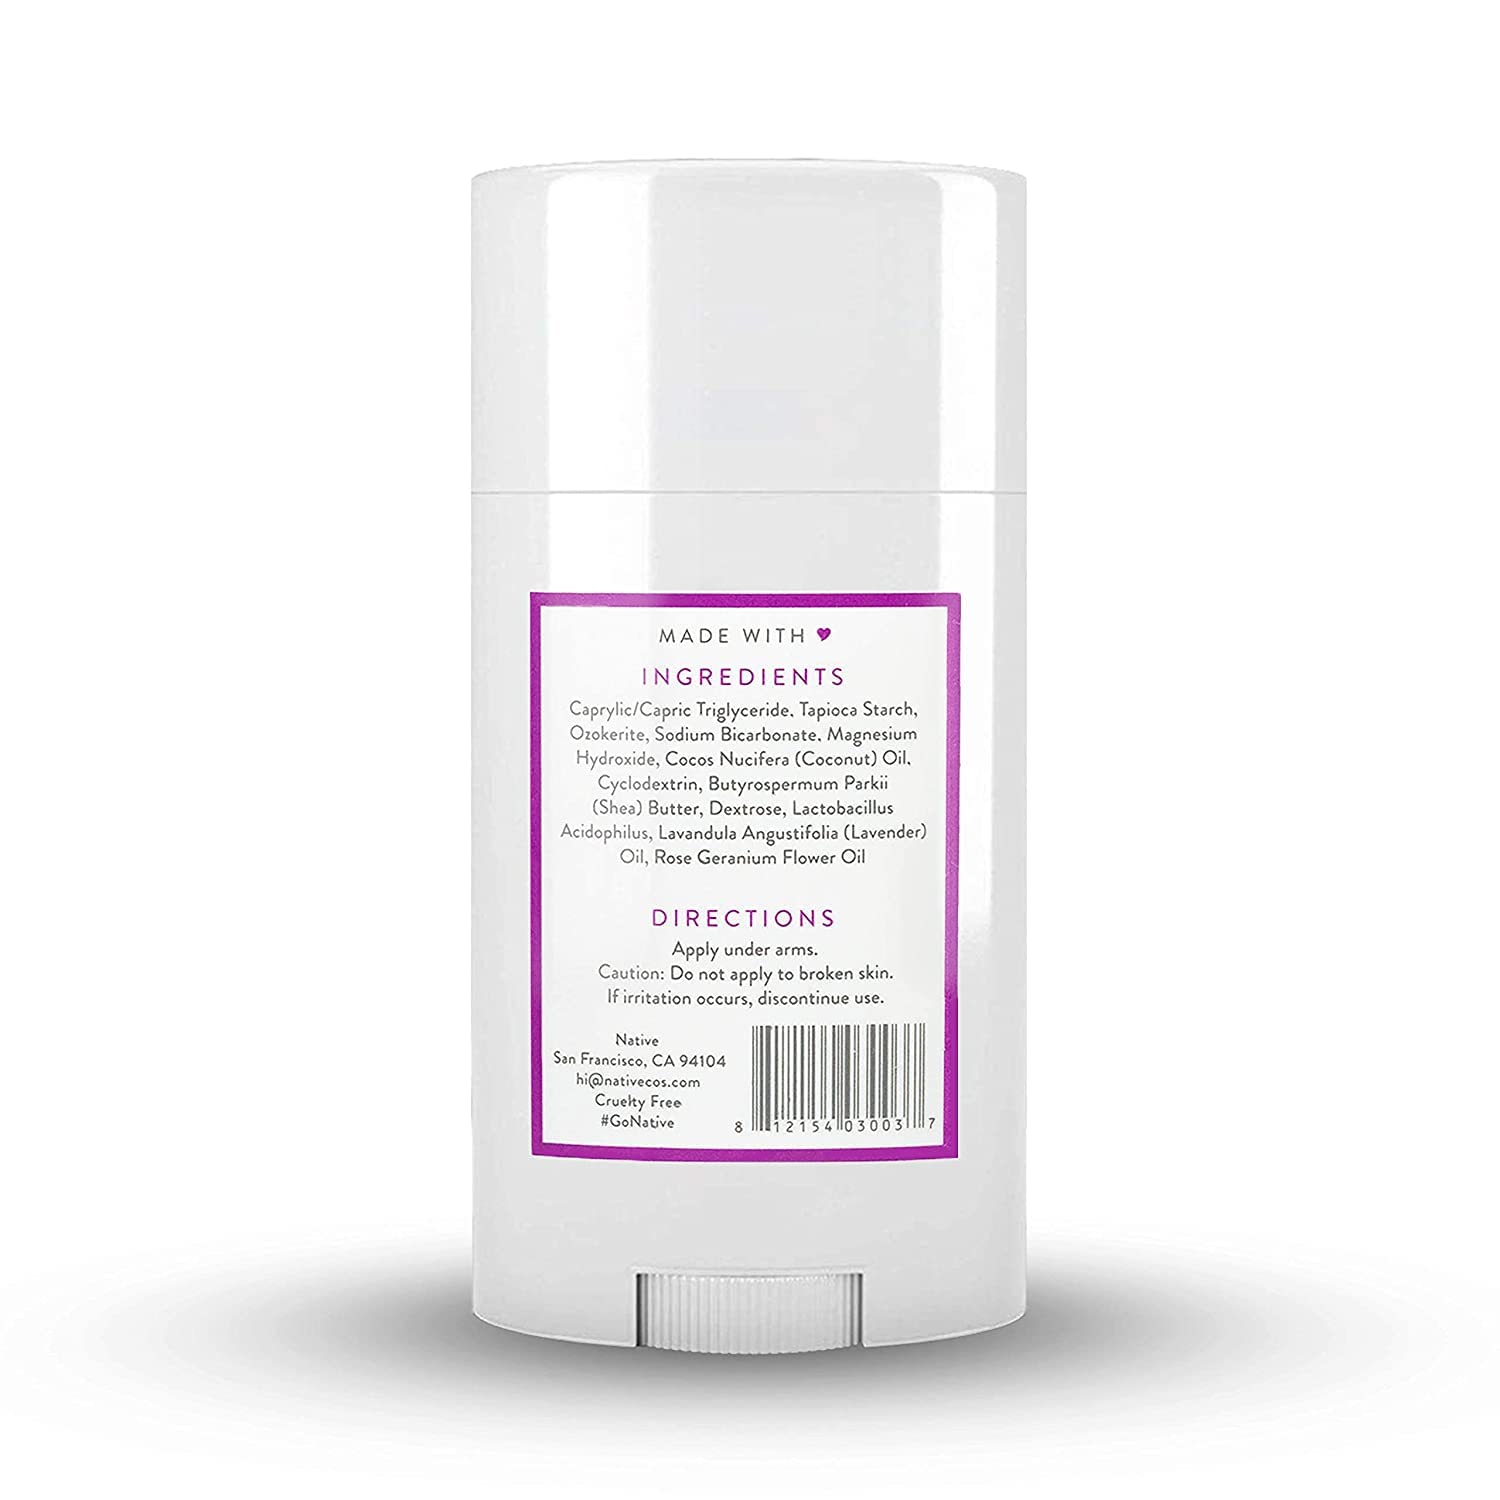 Native Deodorant | Natural Deodorant for Women and Men, Aluminum Free with Baking Soda, Probiotics, Coconut Oil and Shea Butter | Lavender & Rose